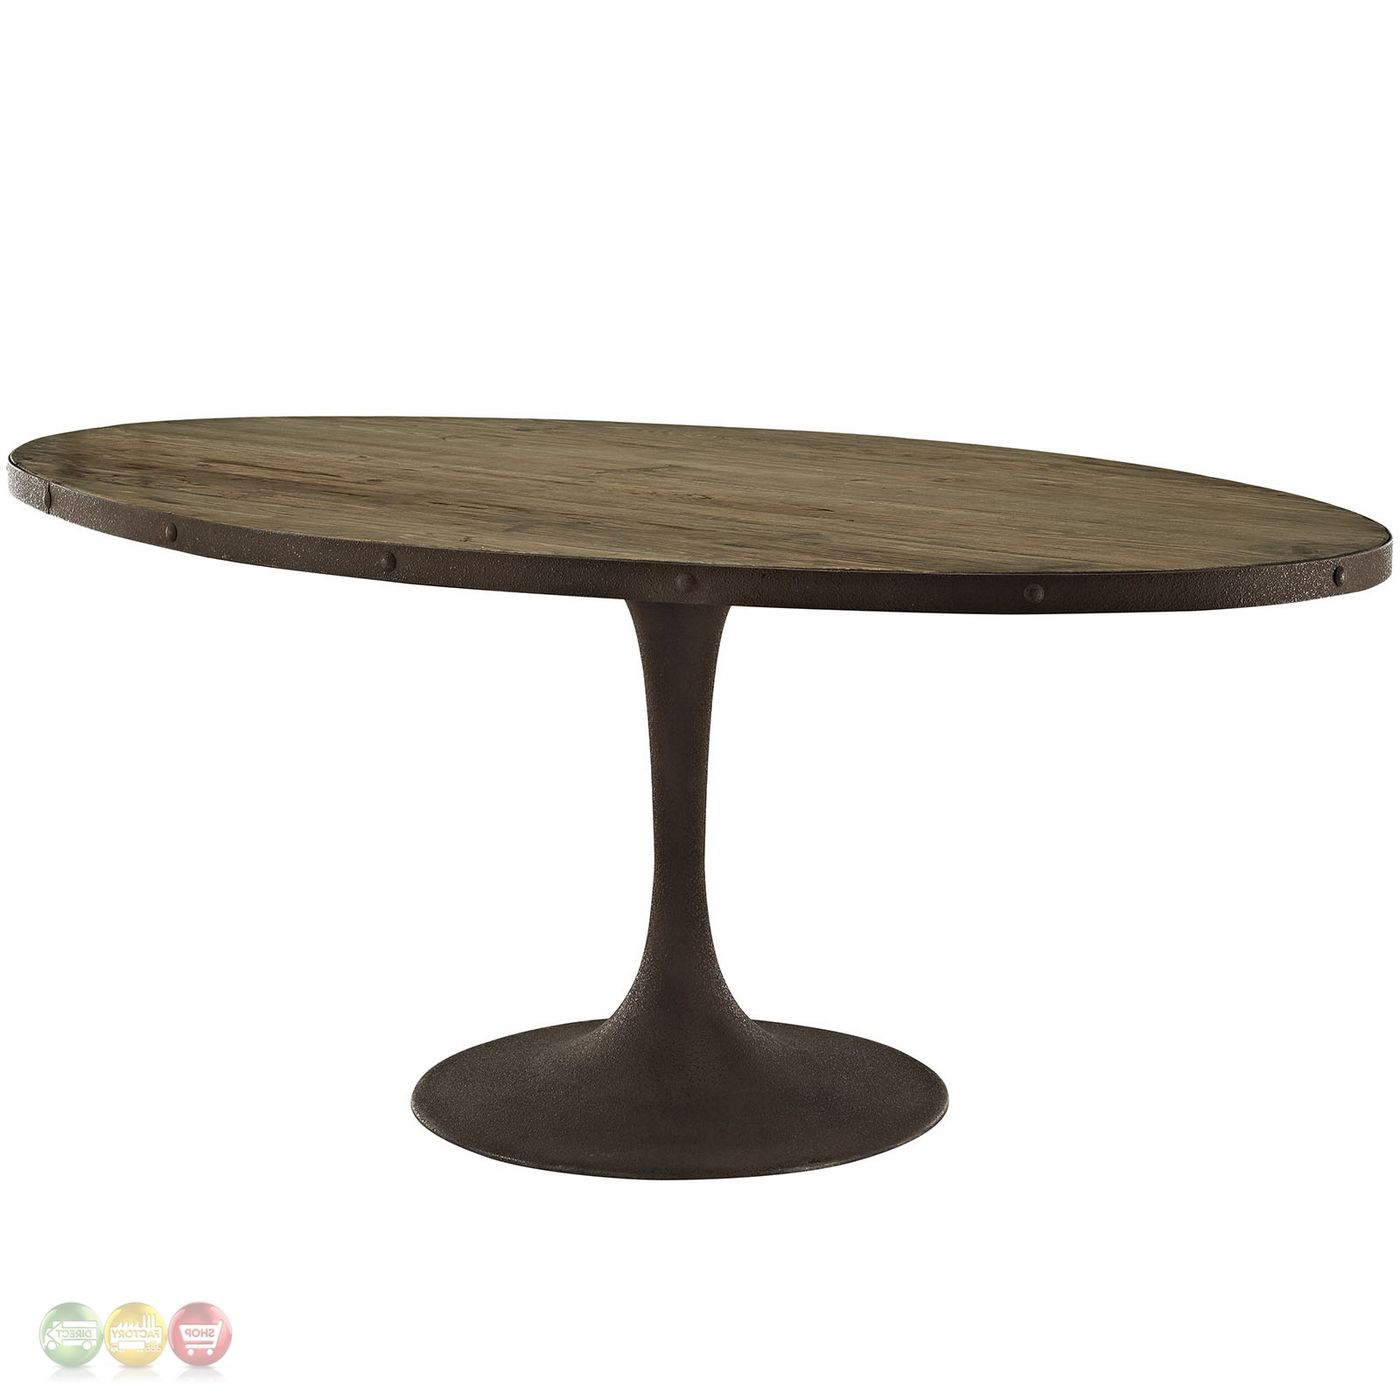 Drive Rustic 78" Oval Wood Top Dining Table W/ Iron Intended For Famous 28'' Pedestal Dining Tables (View 11 of 20)